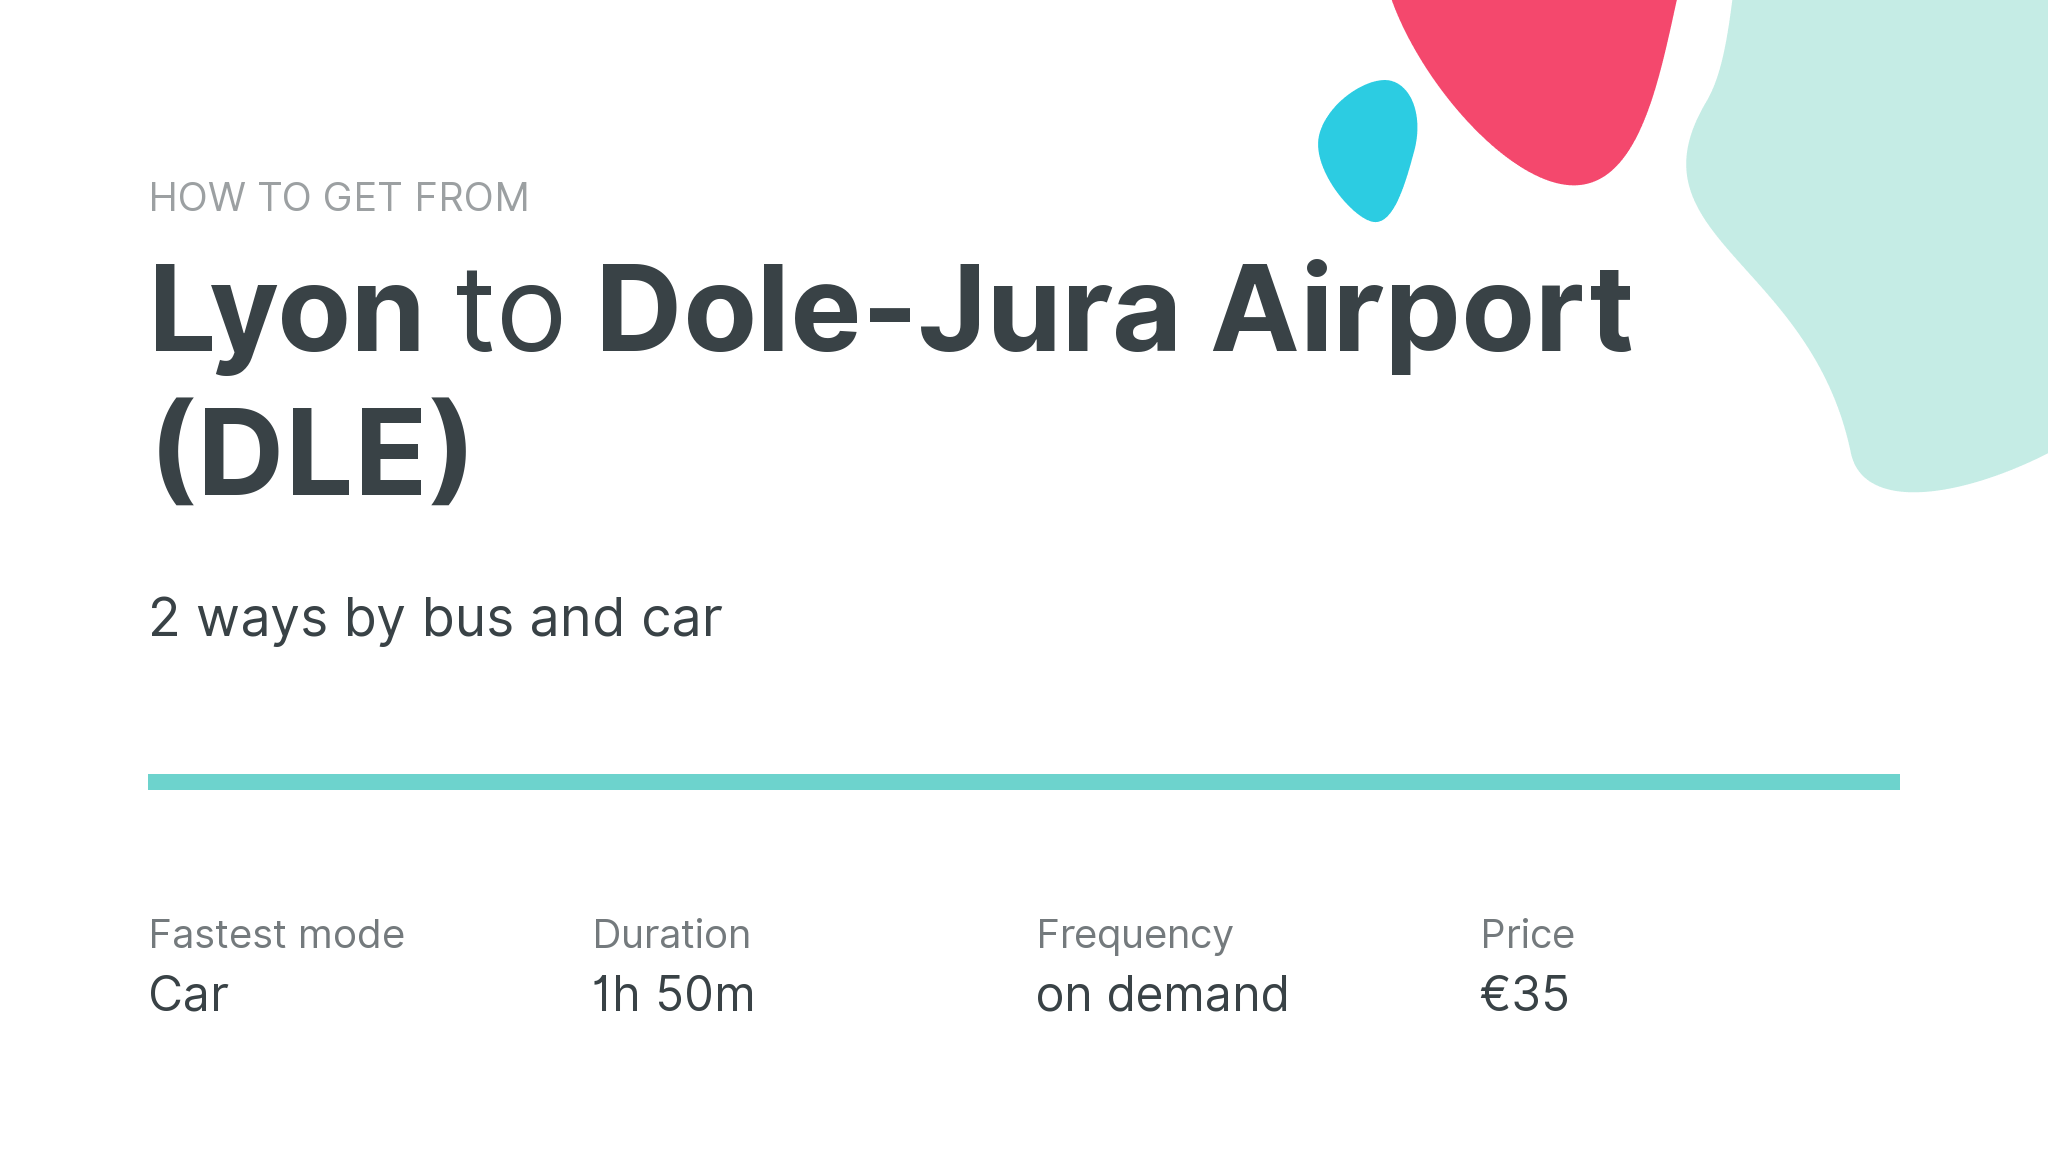 How do I get from Lyon to Dole-Jura Airport (DLE)